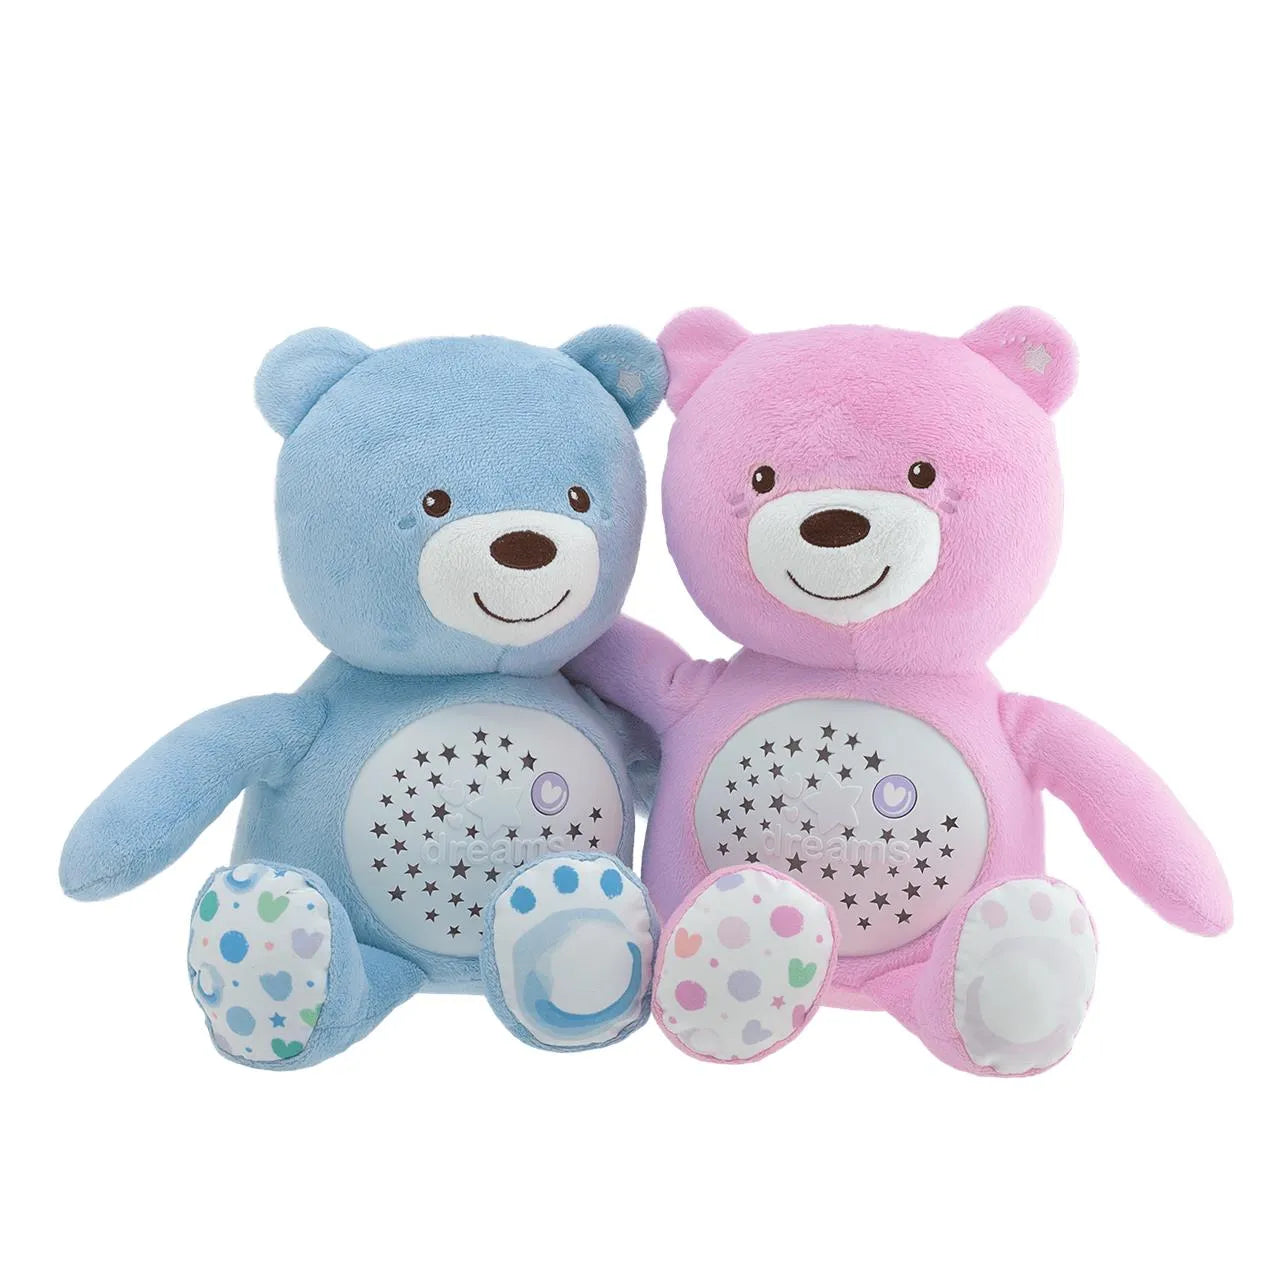 Chicco First Dreams Baby Bear Pink